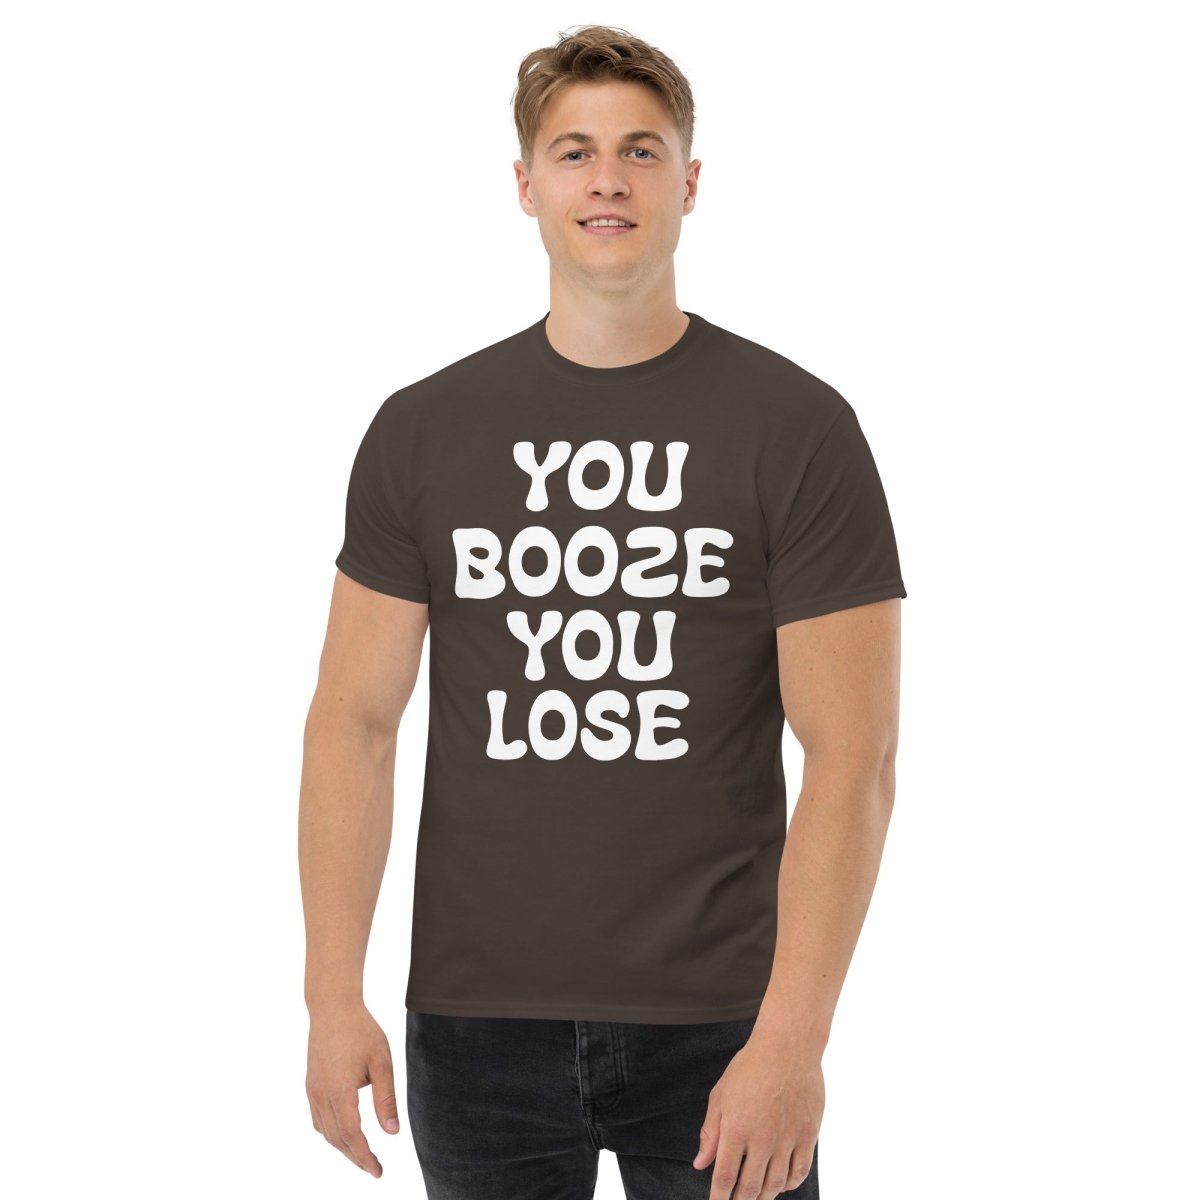 You Booze, You Lose - Men's Classic Statement Tee - Clean & Sober